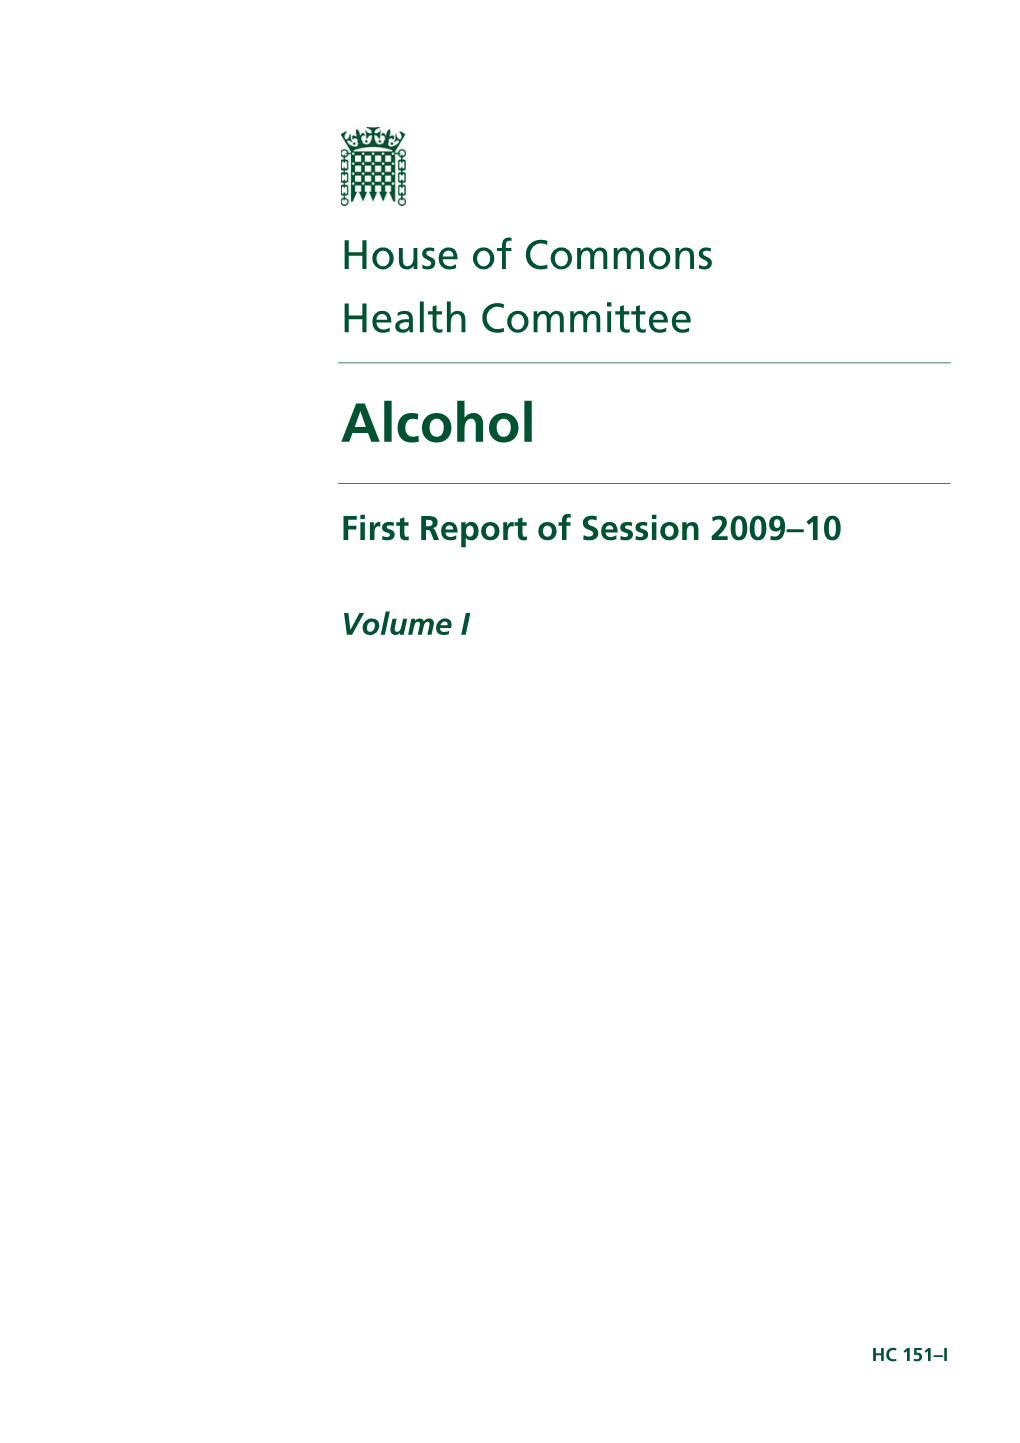 House of Commons Health Committee